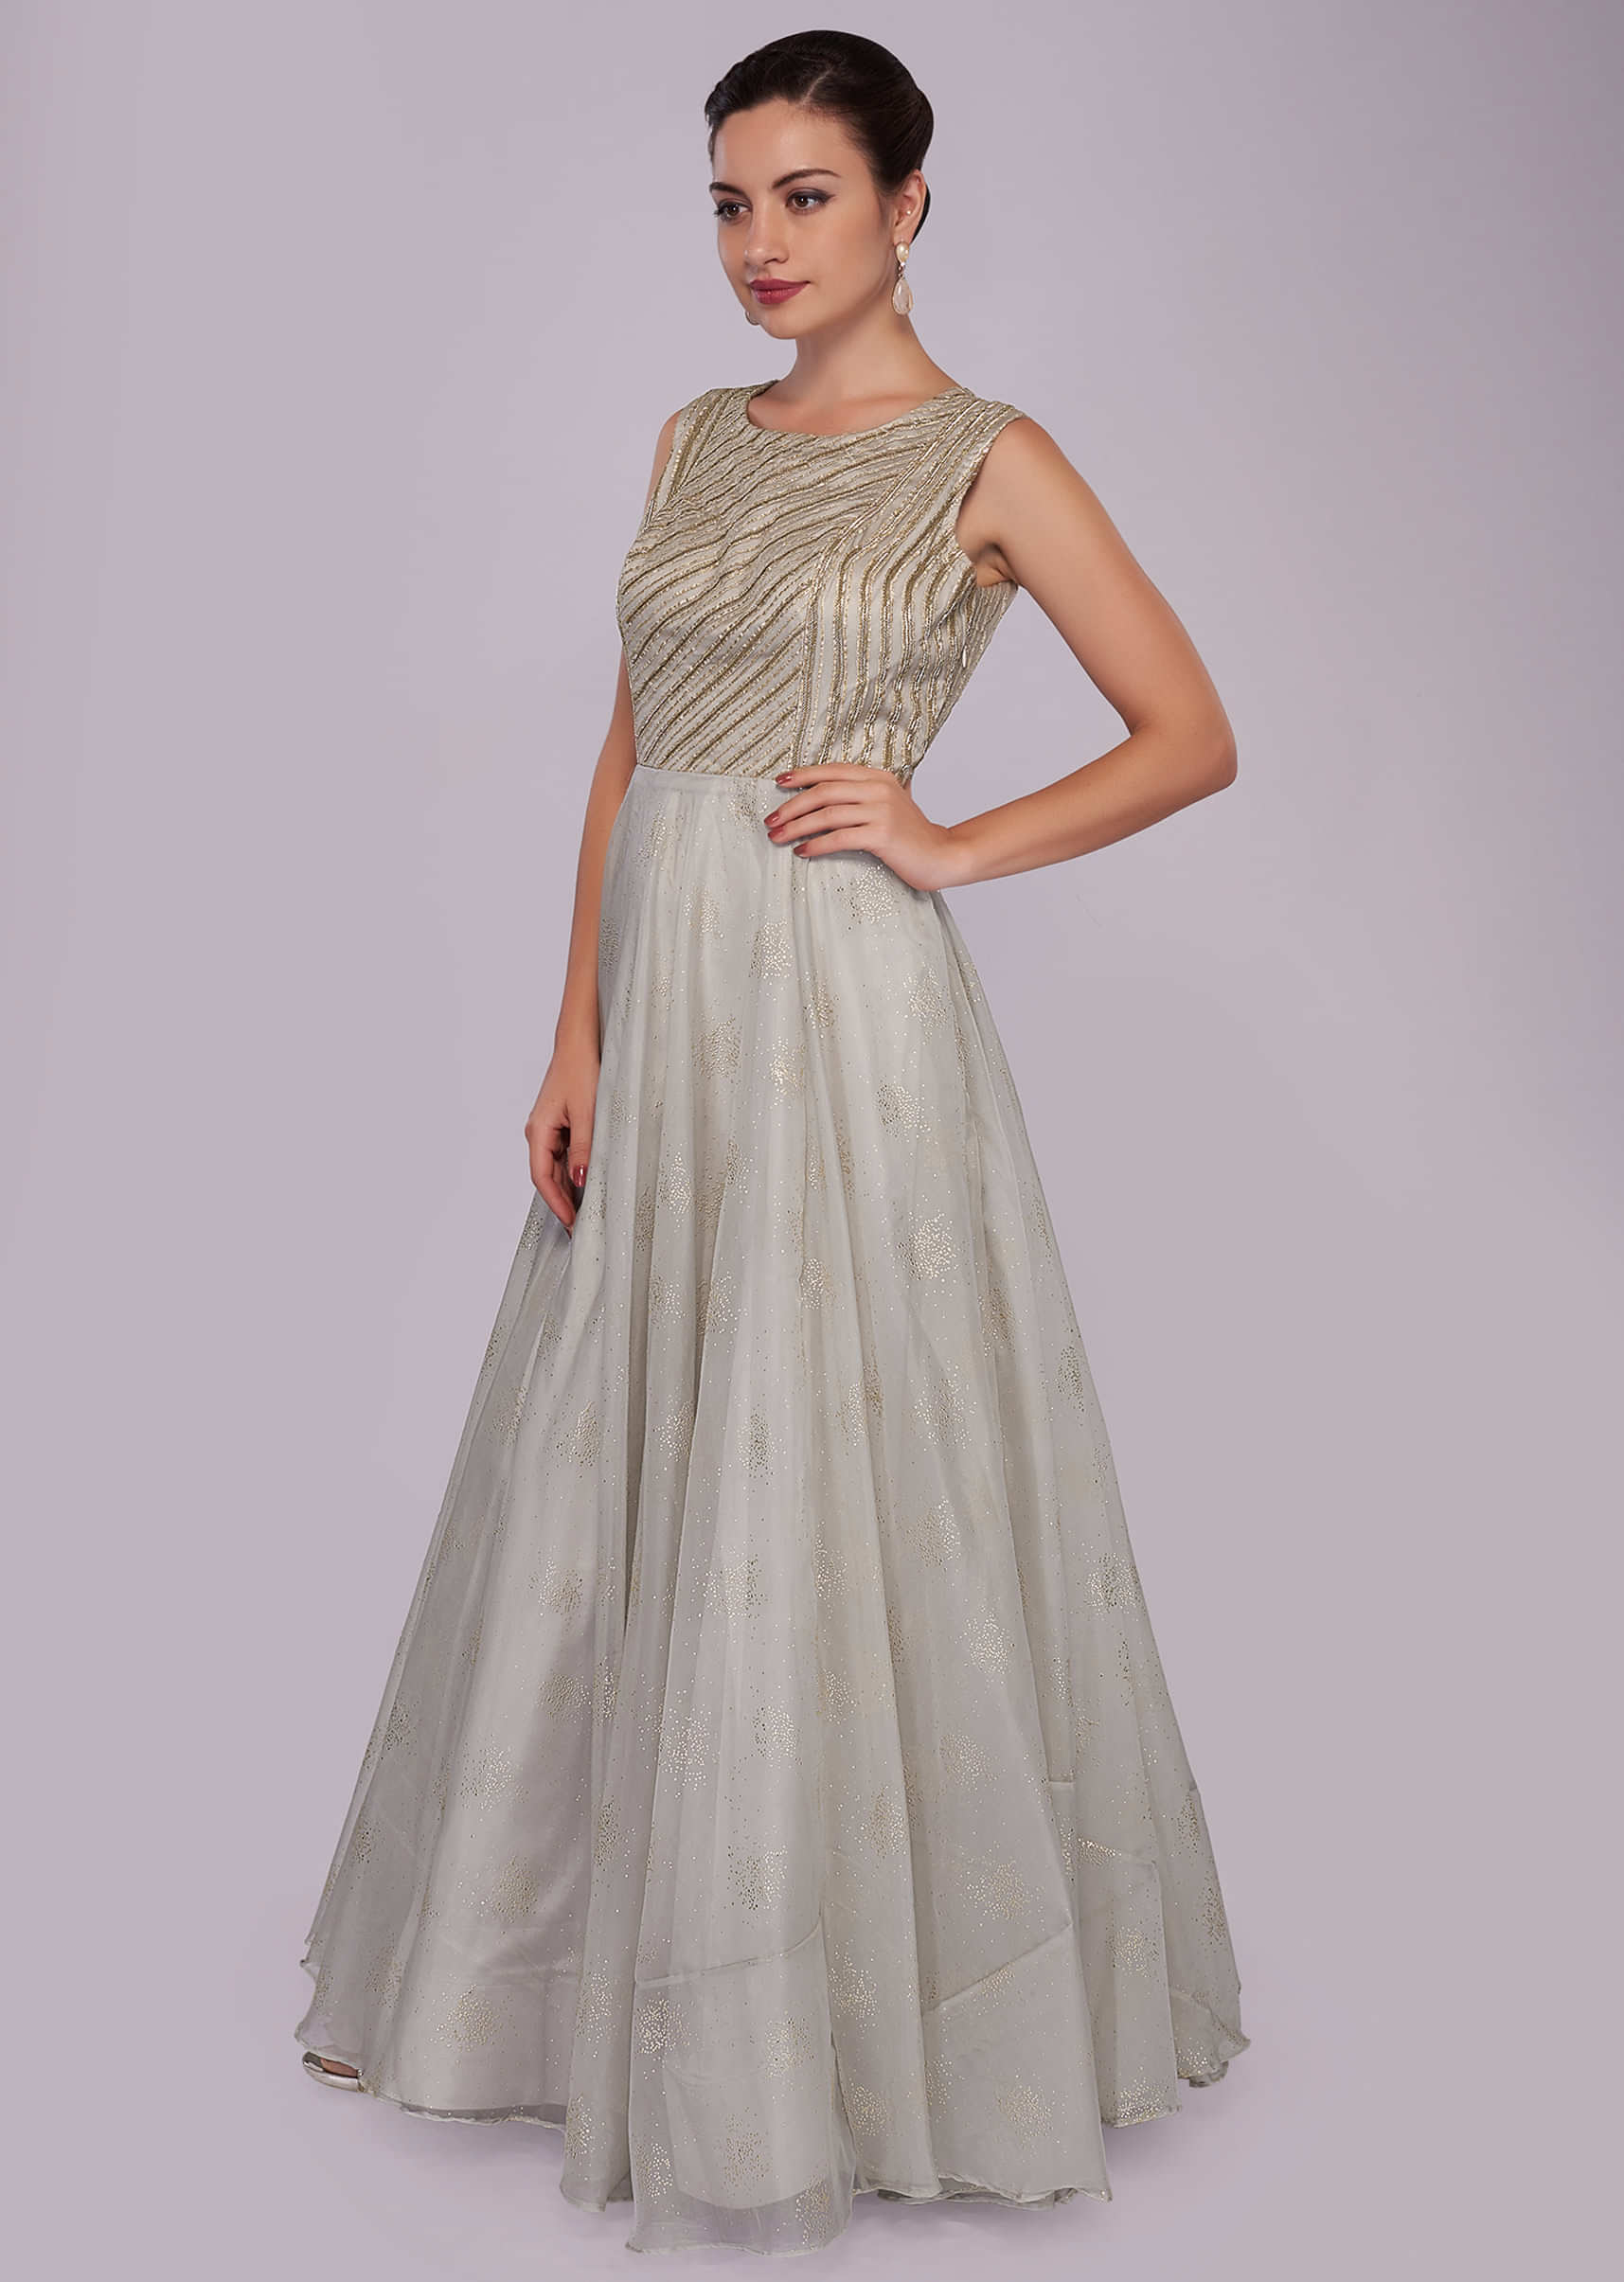 Grey organza anarkali gown with embroidered bodice